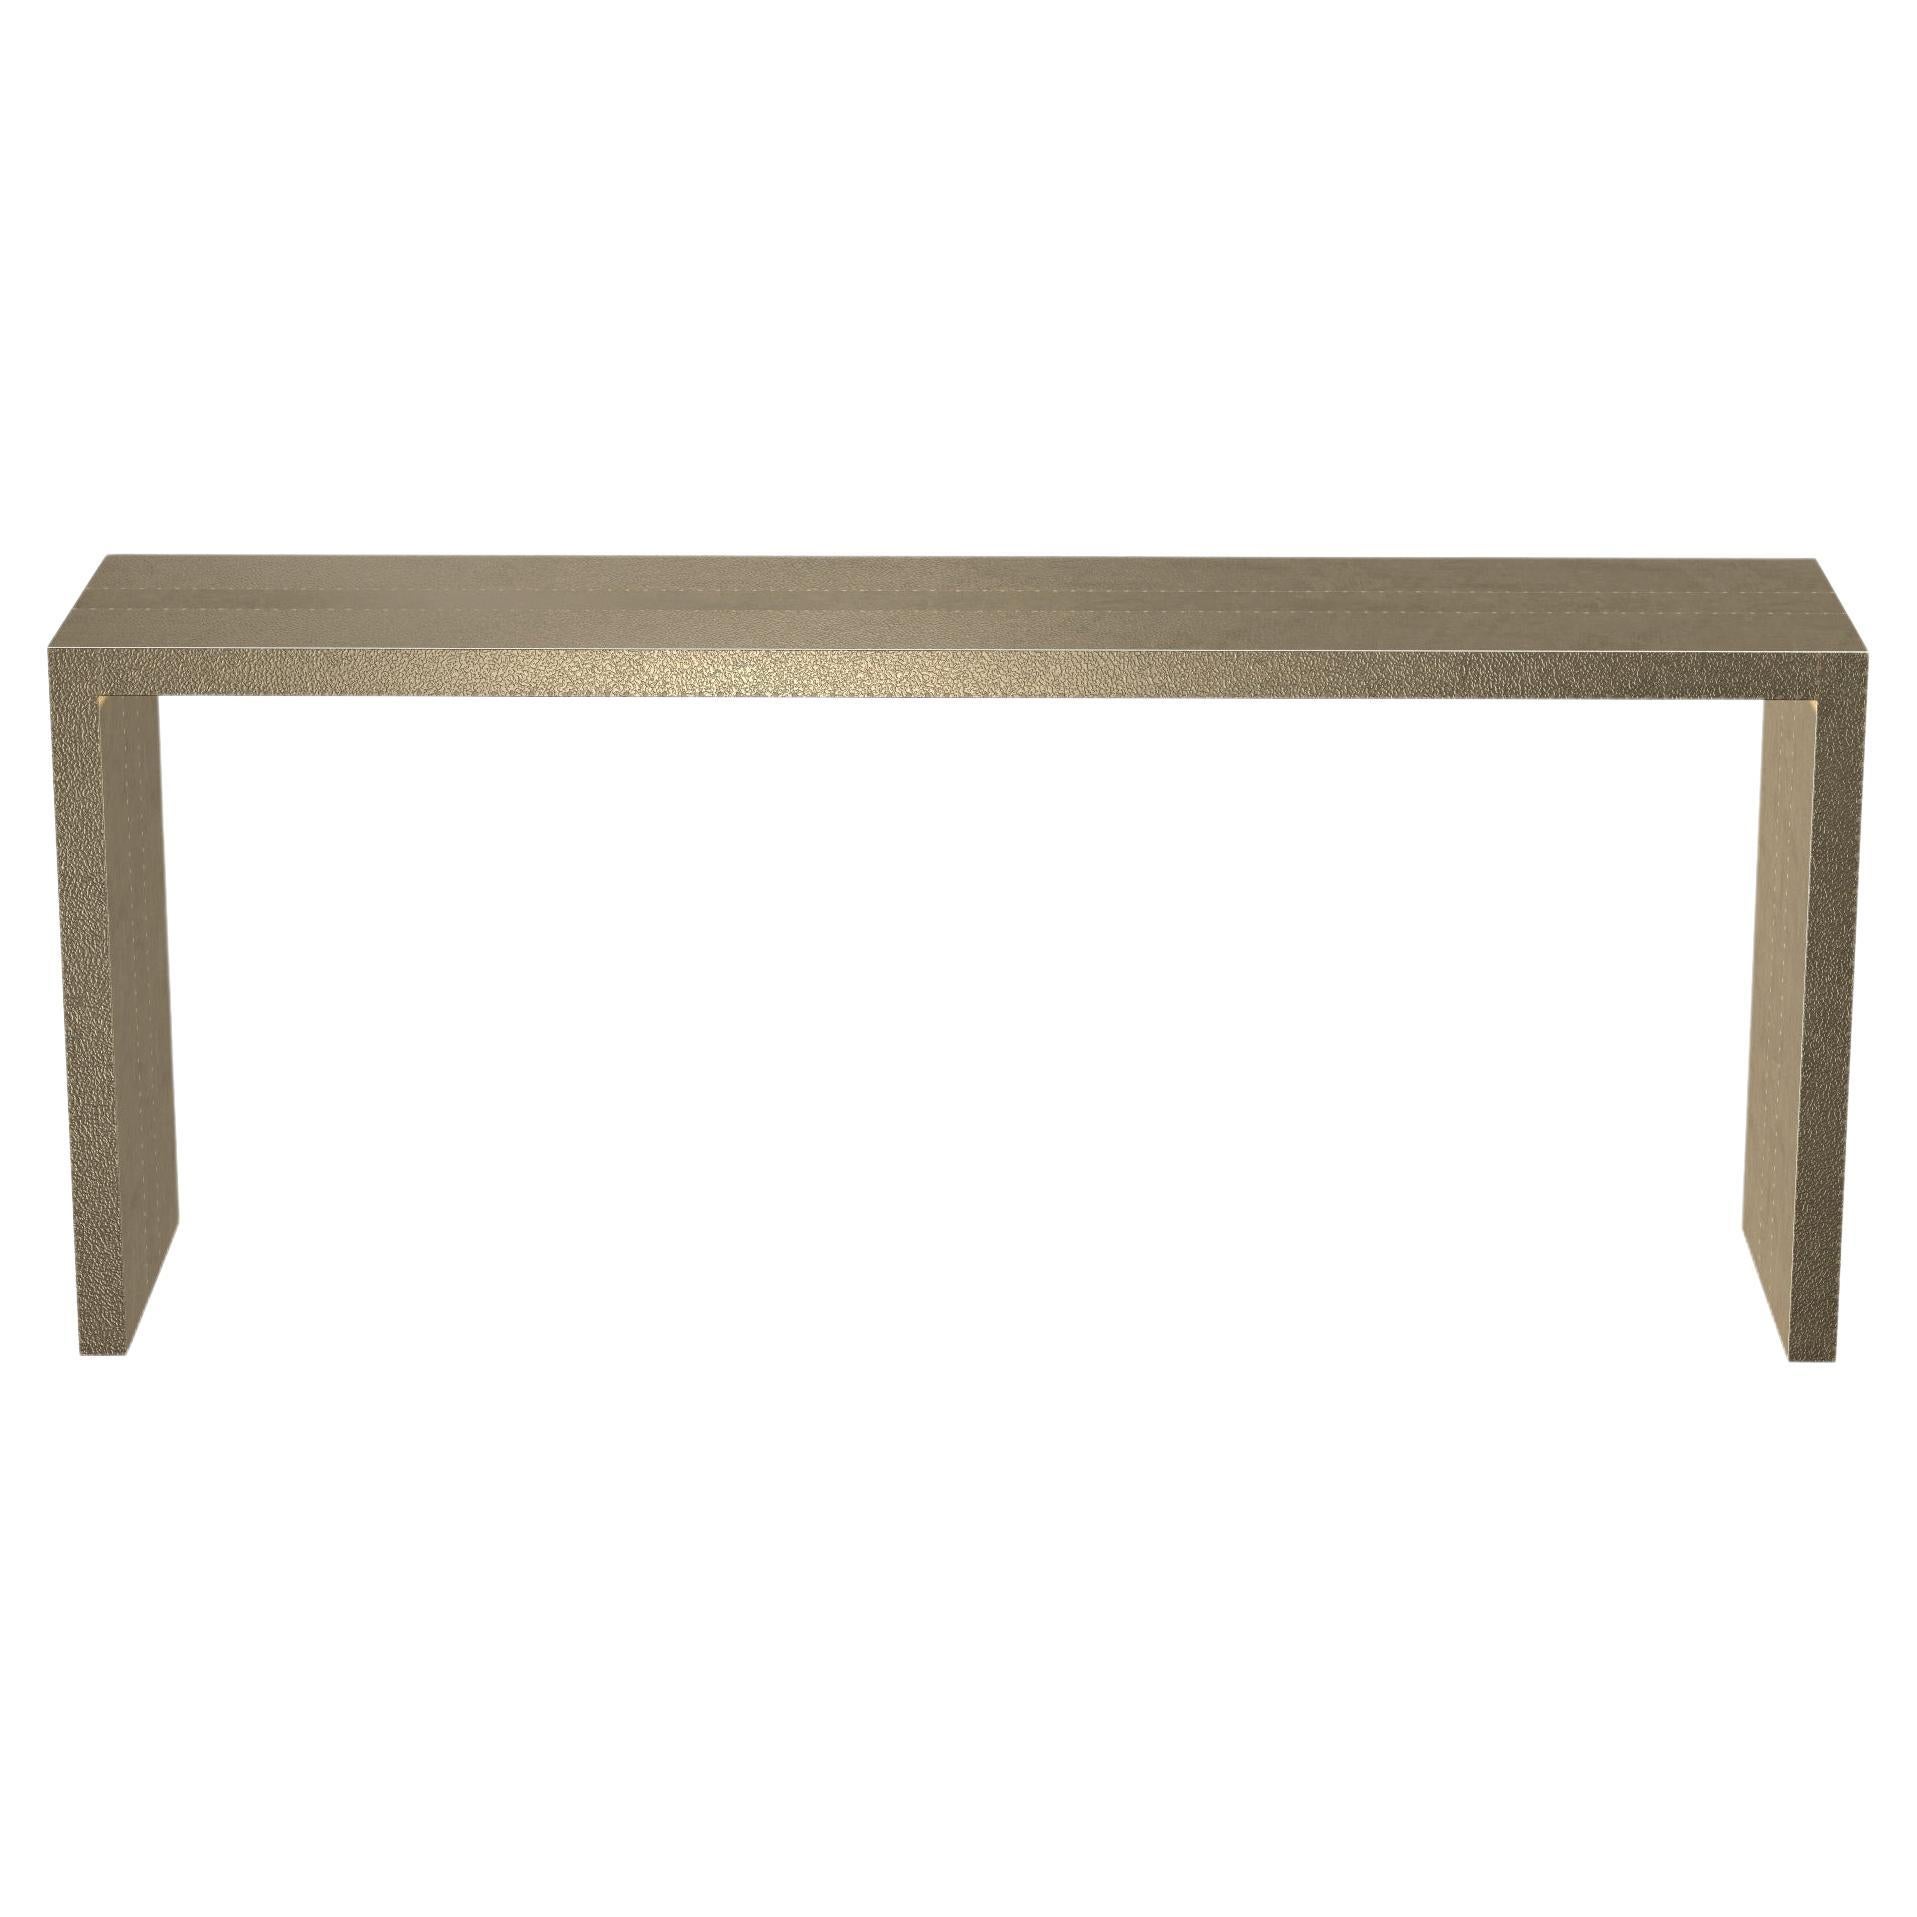 Art Deco Game Console Tables in Fine Hammered Brass by Alison Spear